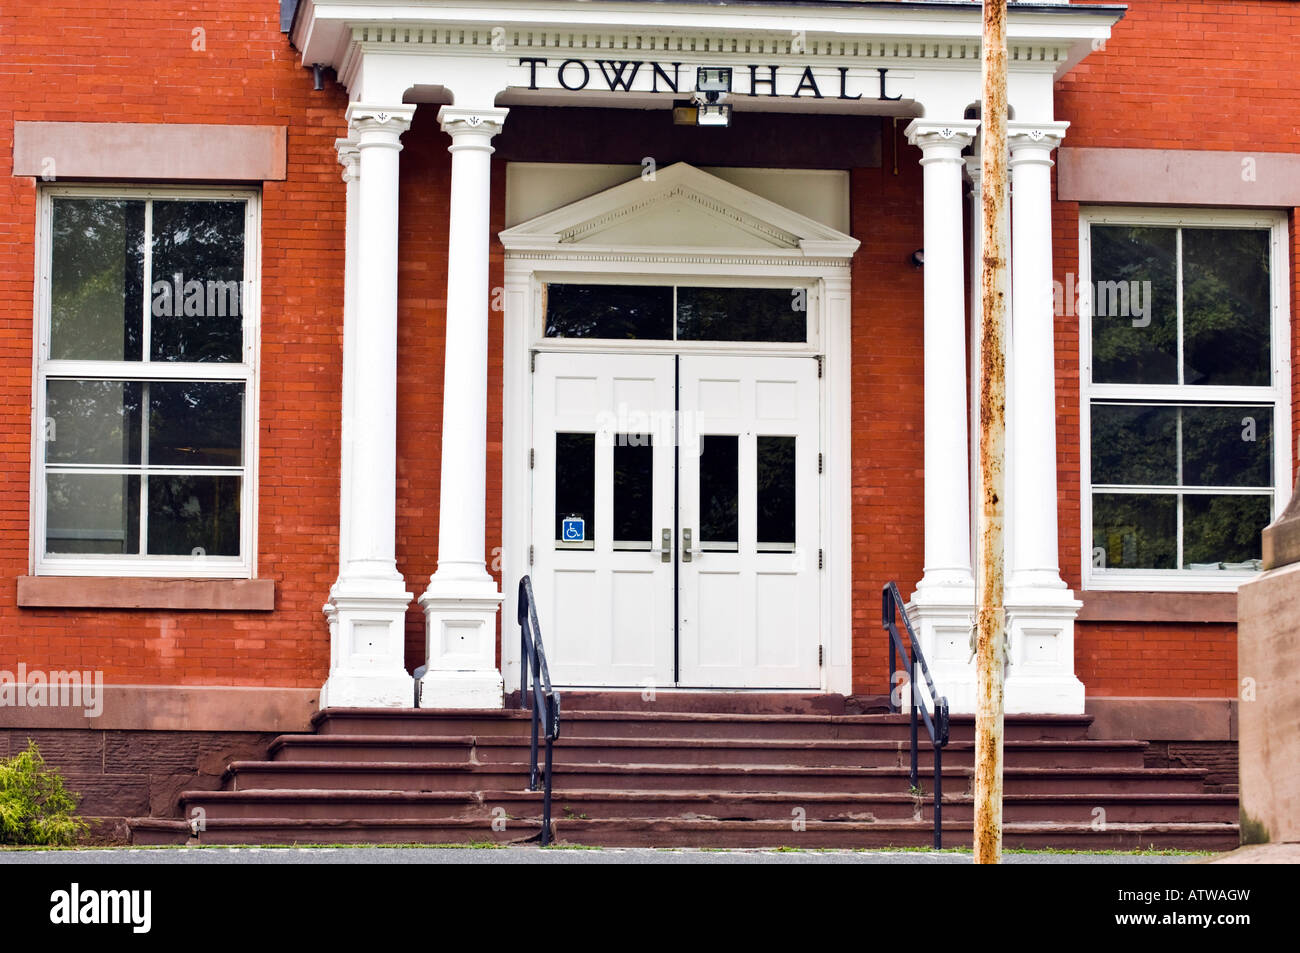 Town hall entrance with white pillars and crumbling steps handicap sign in door window Stock Photo